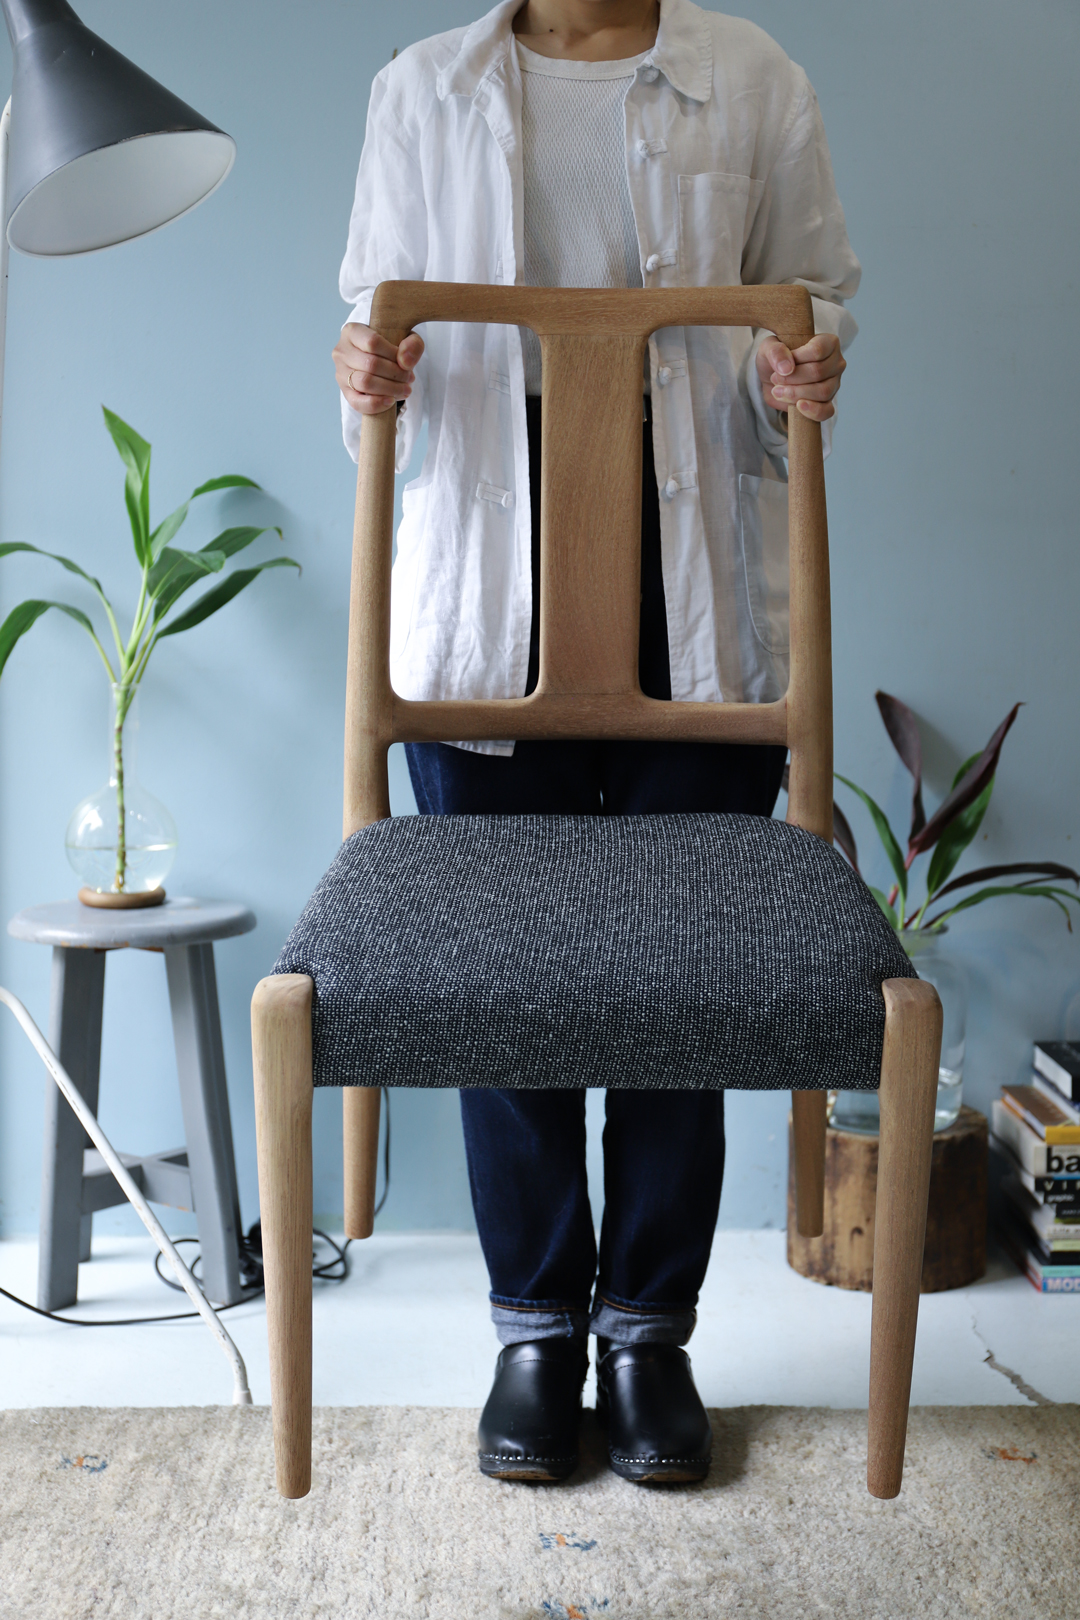 Vintage Oakwood Dining Chair/ヴィンテージ ダイニングチェア 椅子 オーク材 北欧デザイン ミッドセンチュリーモダン